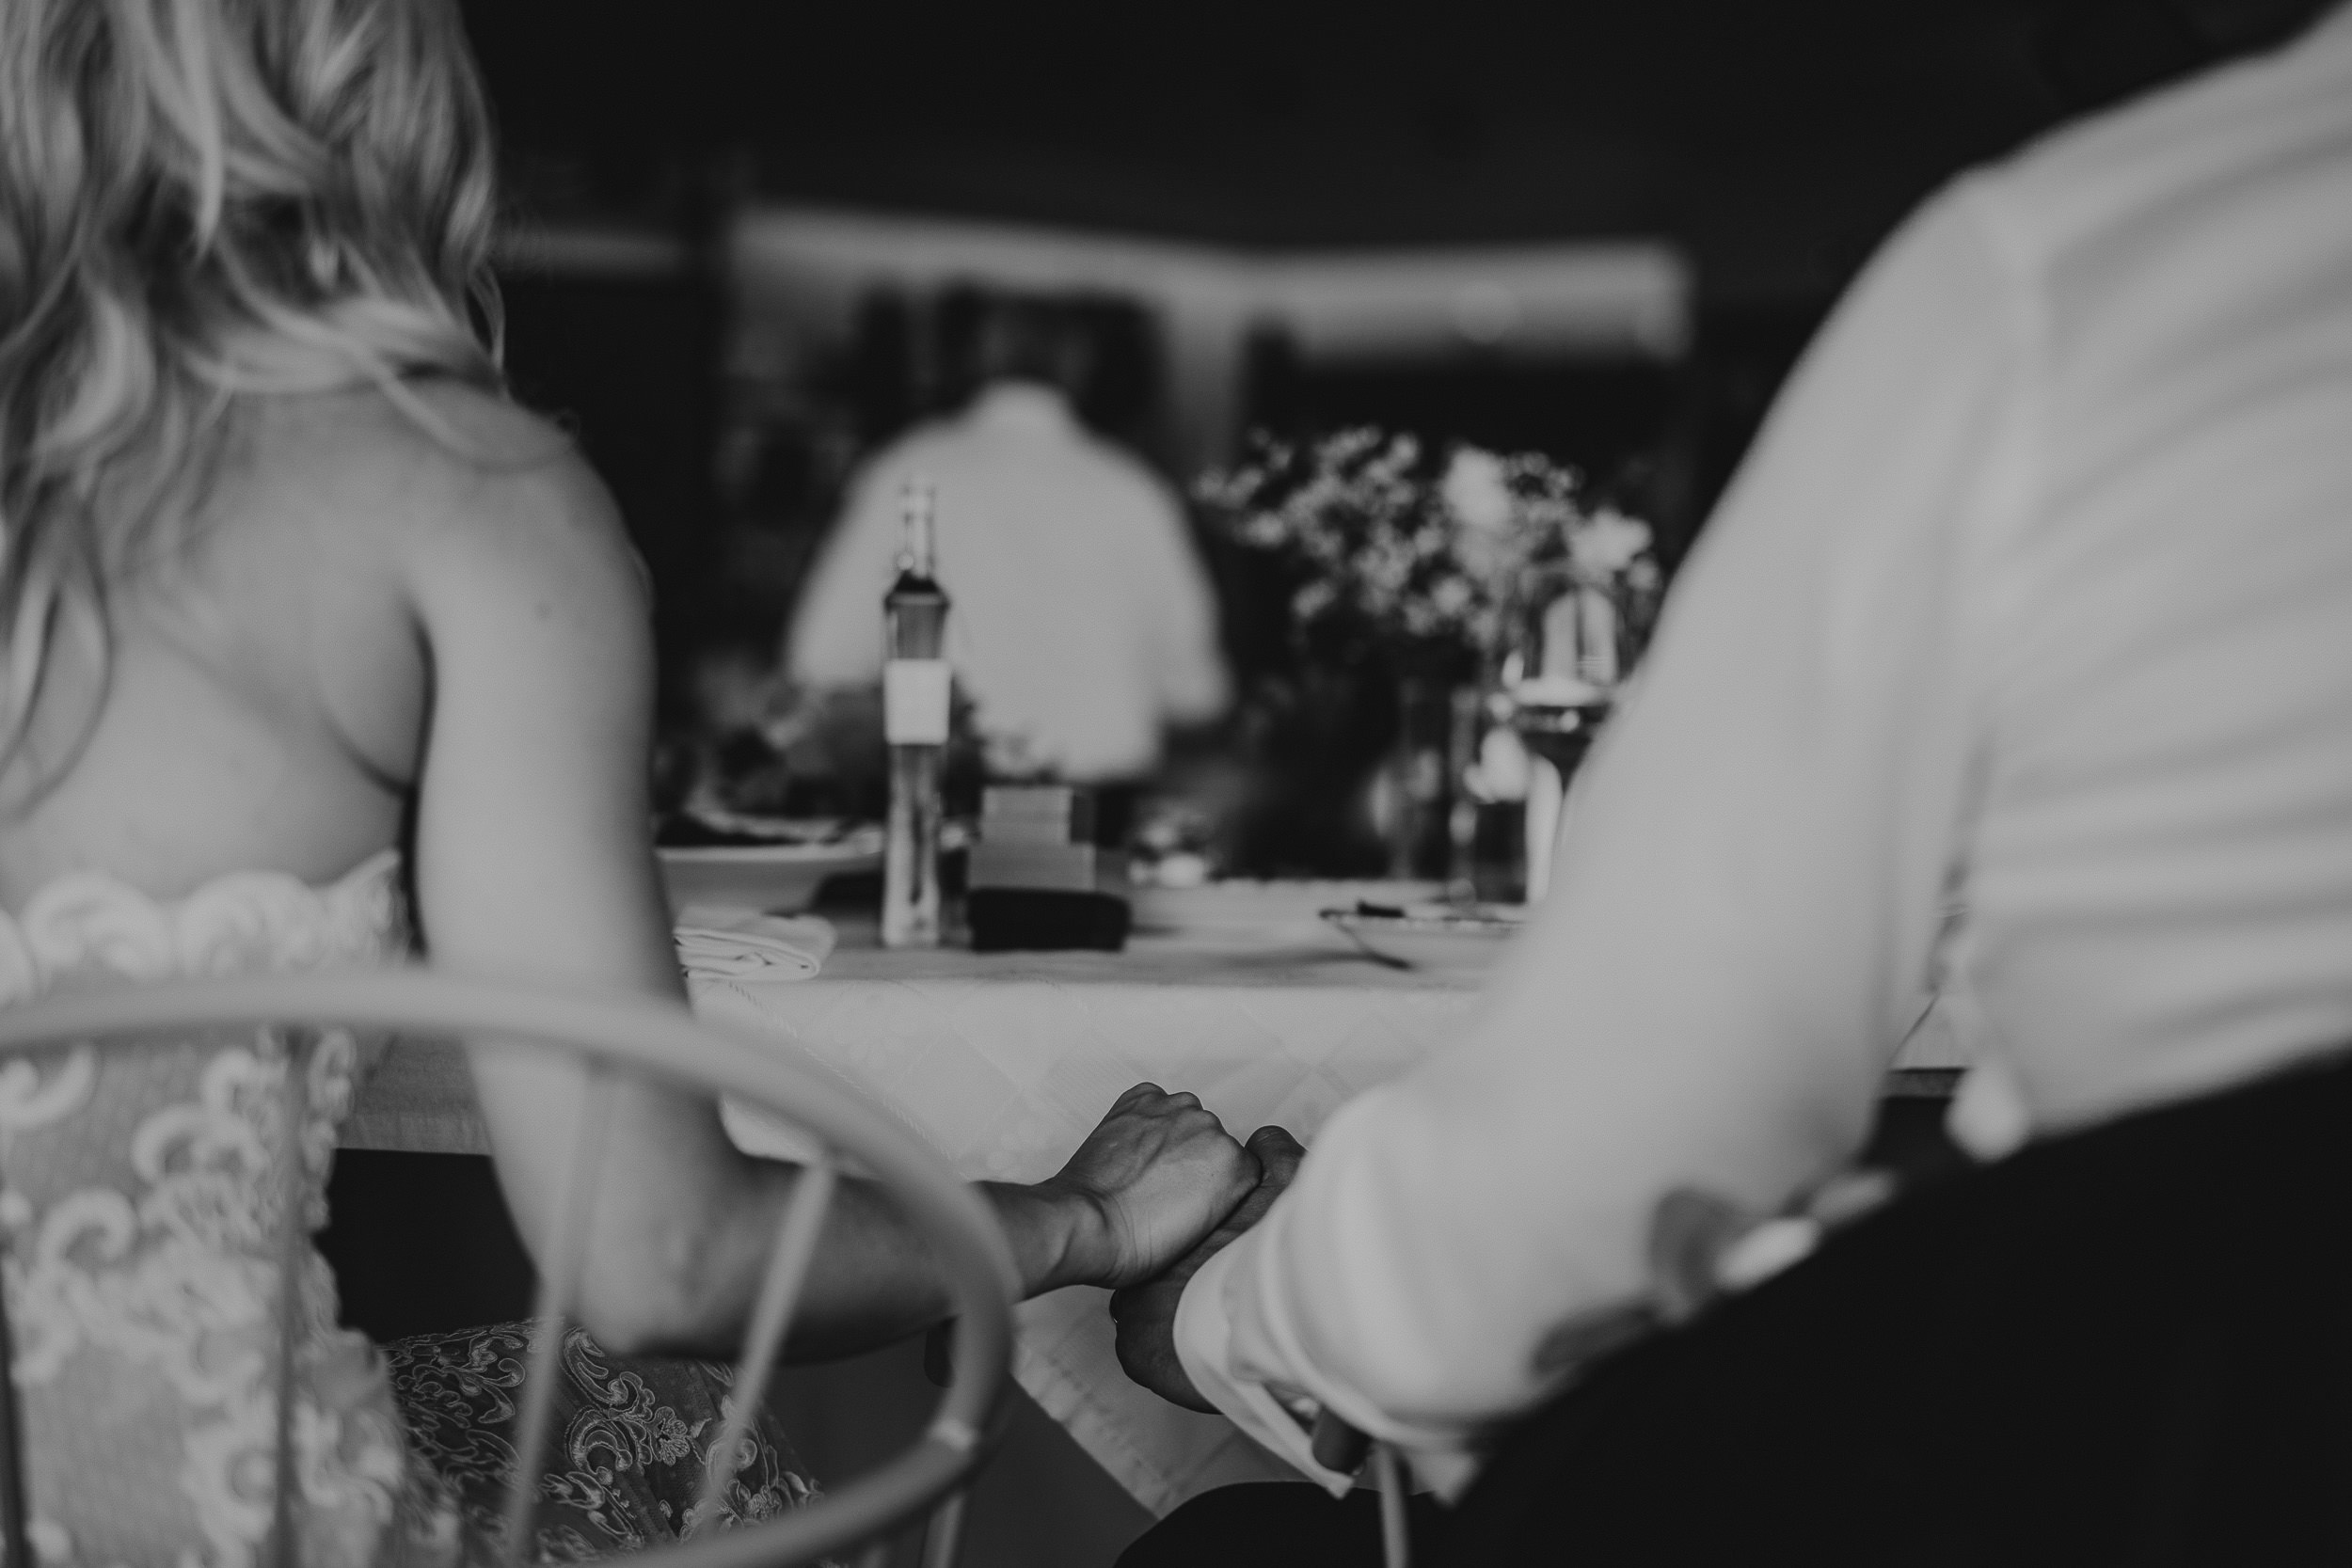 A wedding photographer captures the bride and groom's tender hand-holding moment at a table.